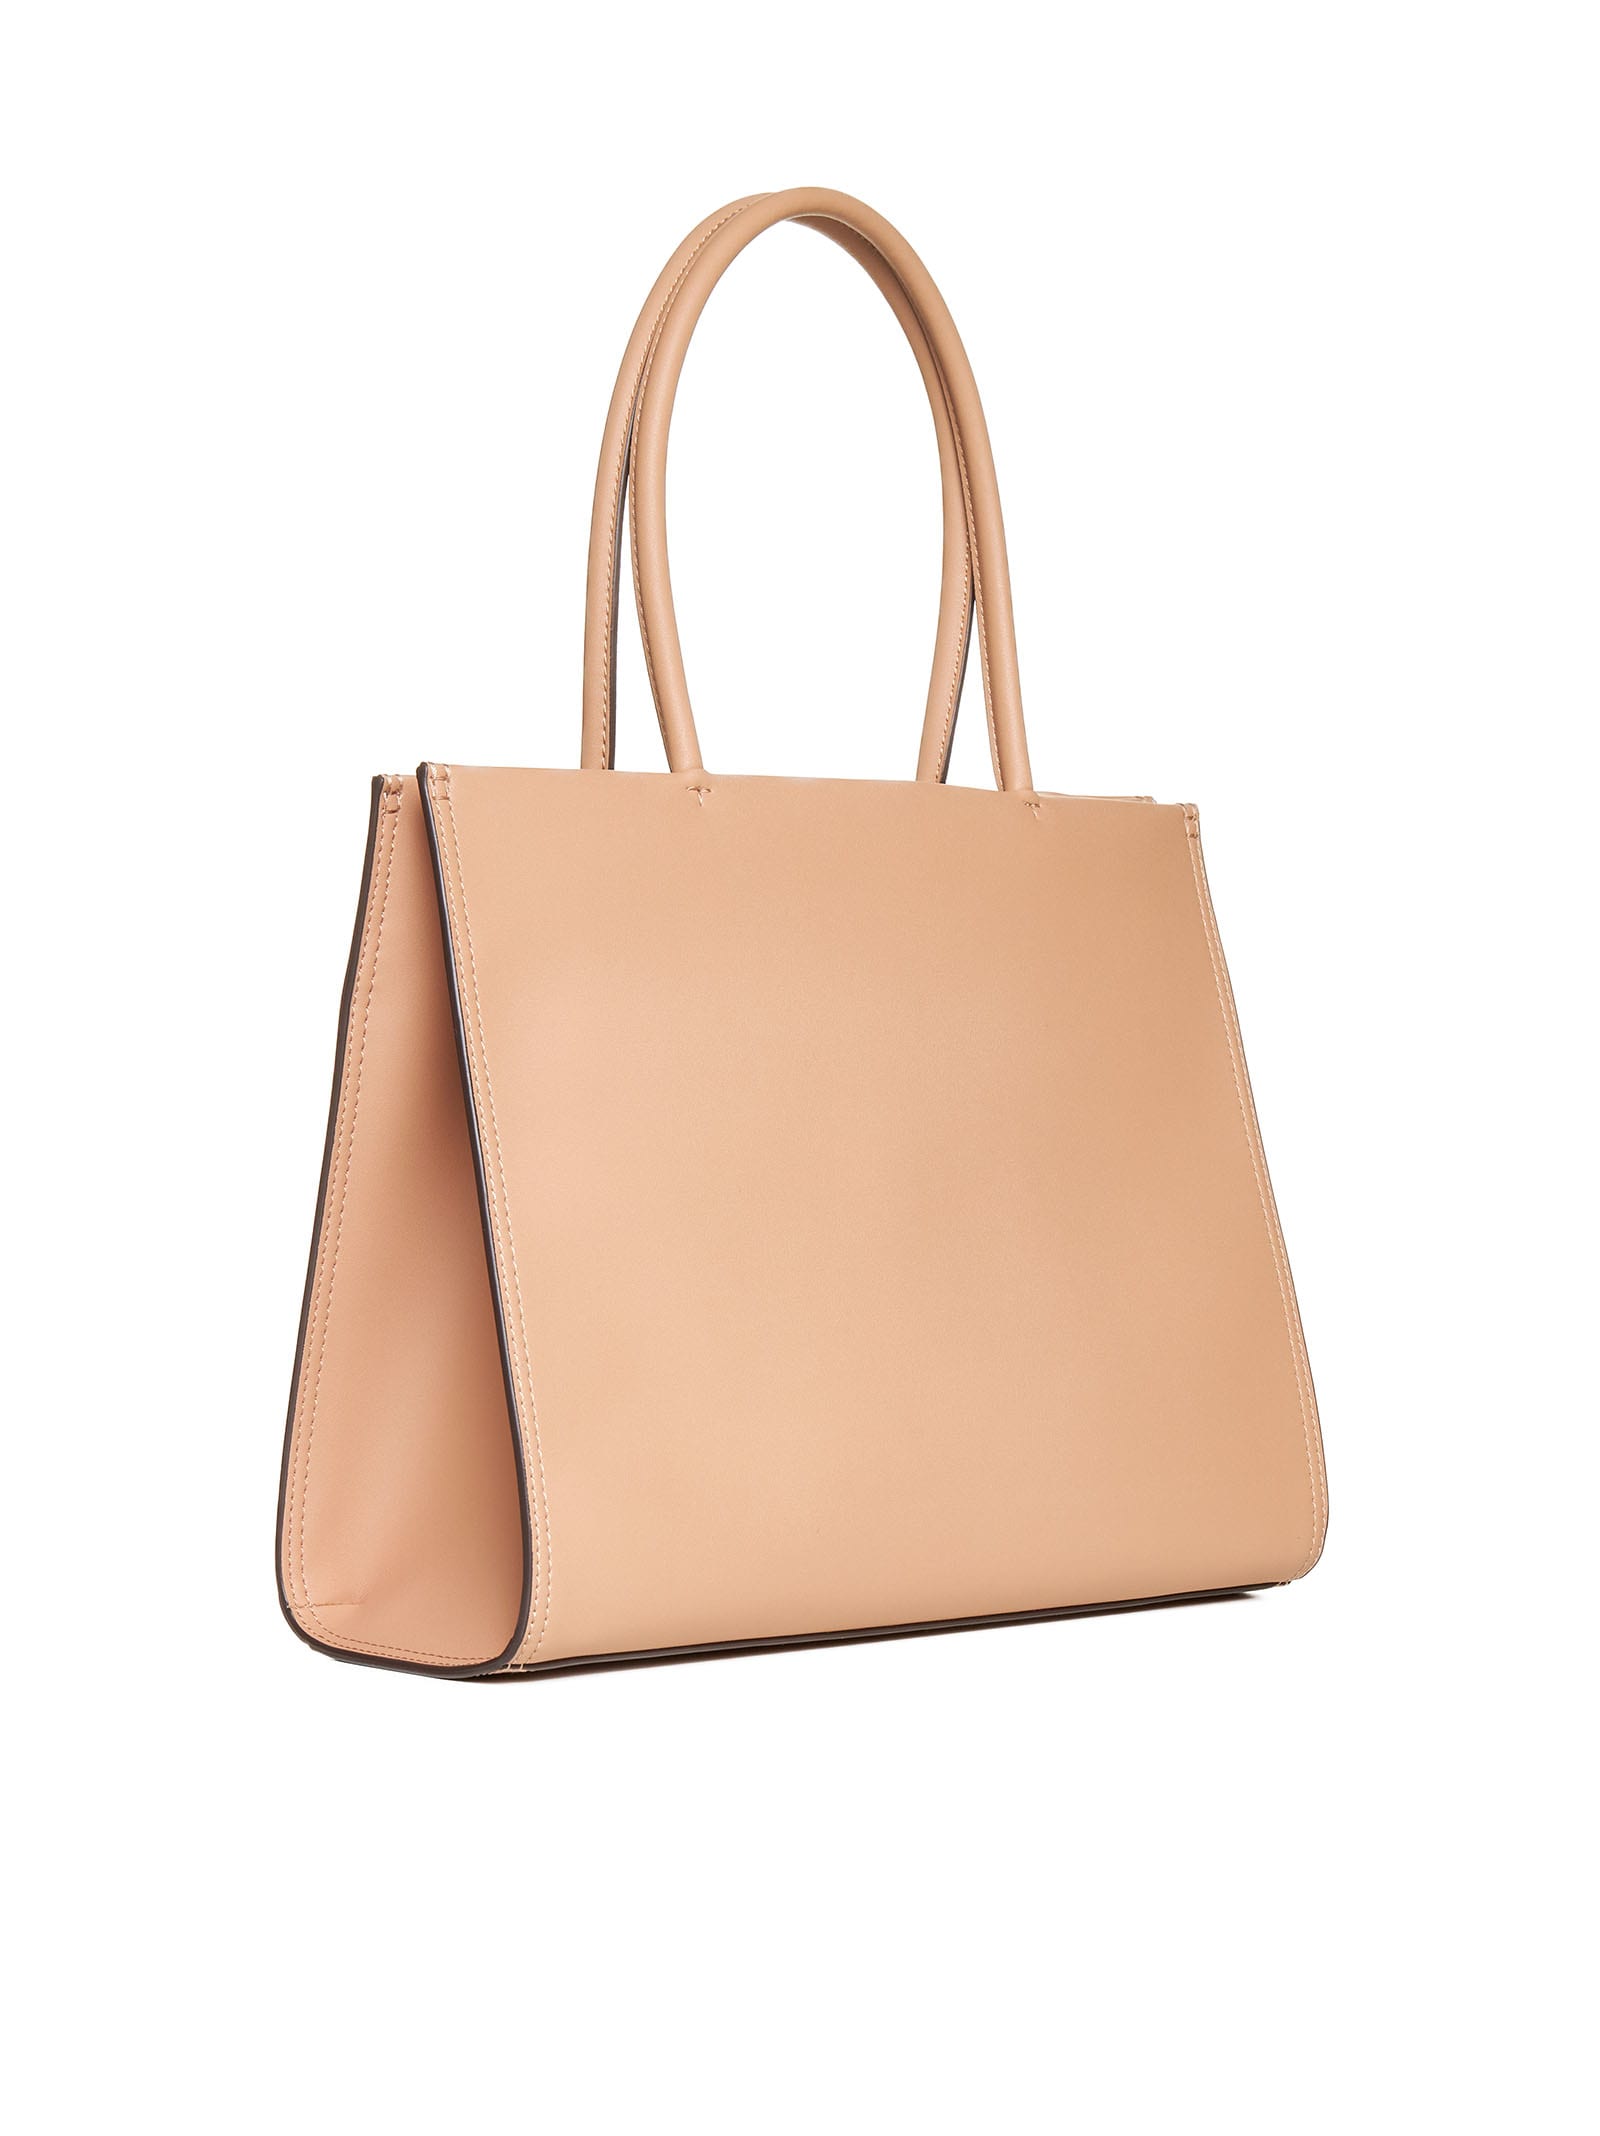 Shop Tory Burch Tote In Light Sand